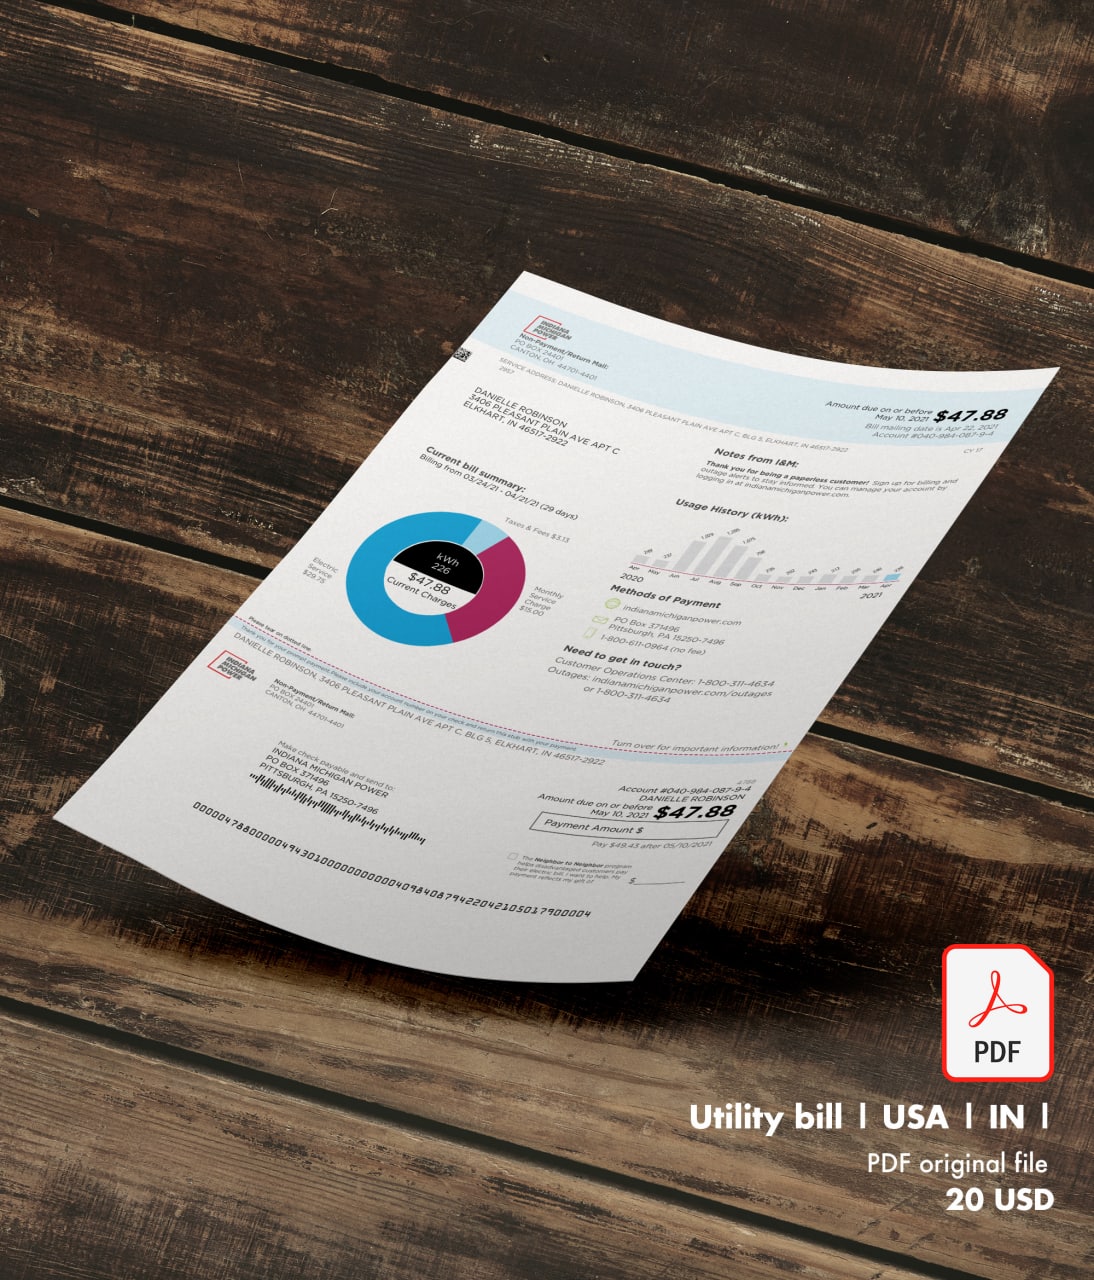 Utility bill | Indiana POWER | USA | IN1